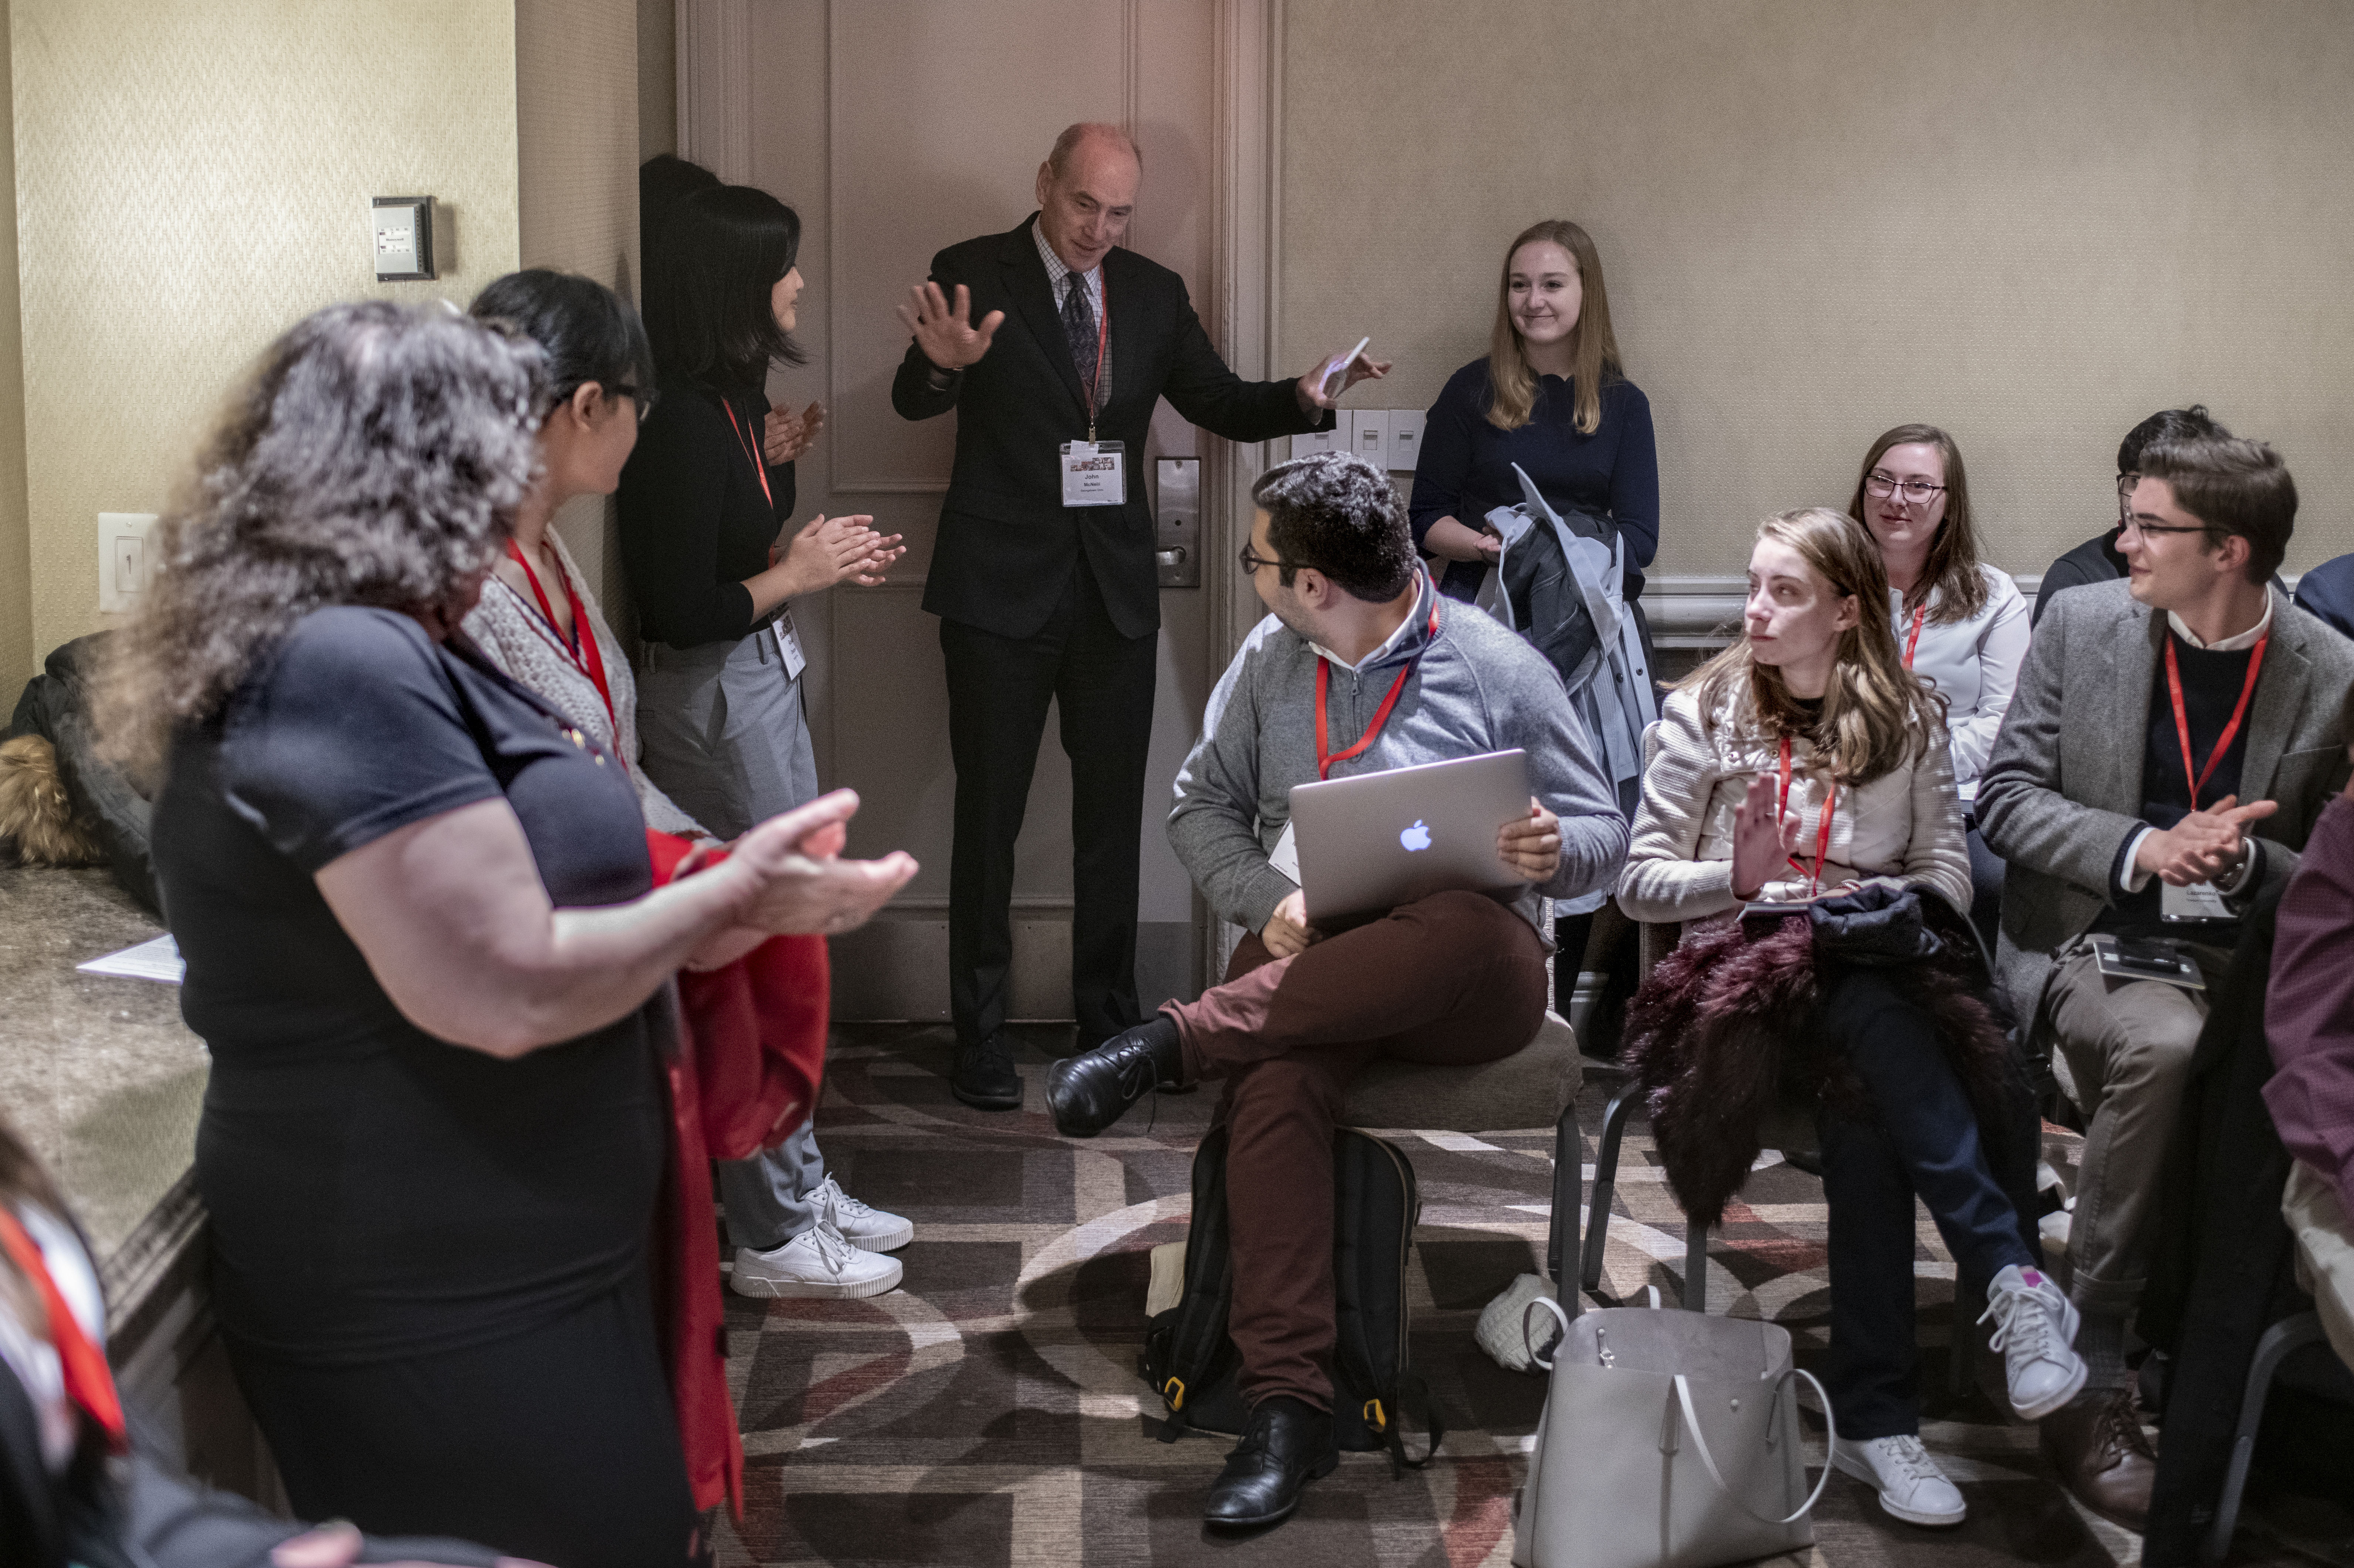 2019 AHA president John R. McNeill greets undergraduate attendees at the 2020 annual meeting.